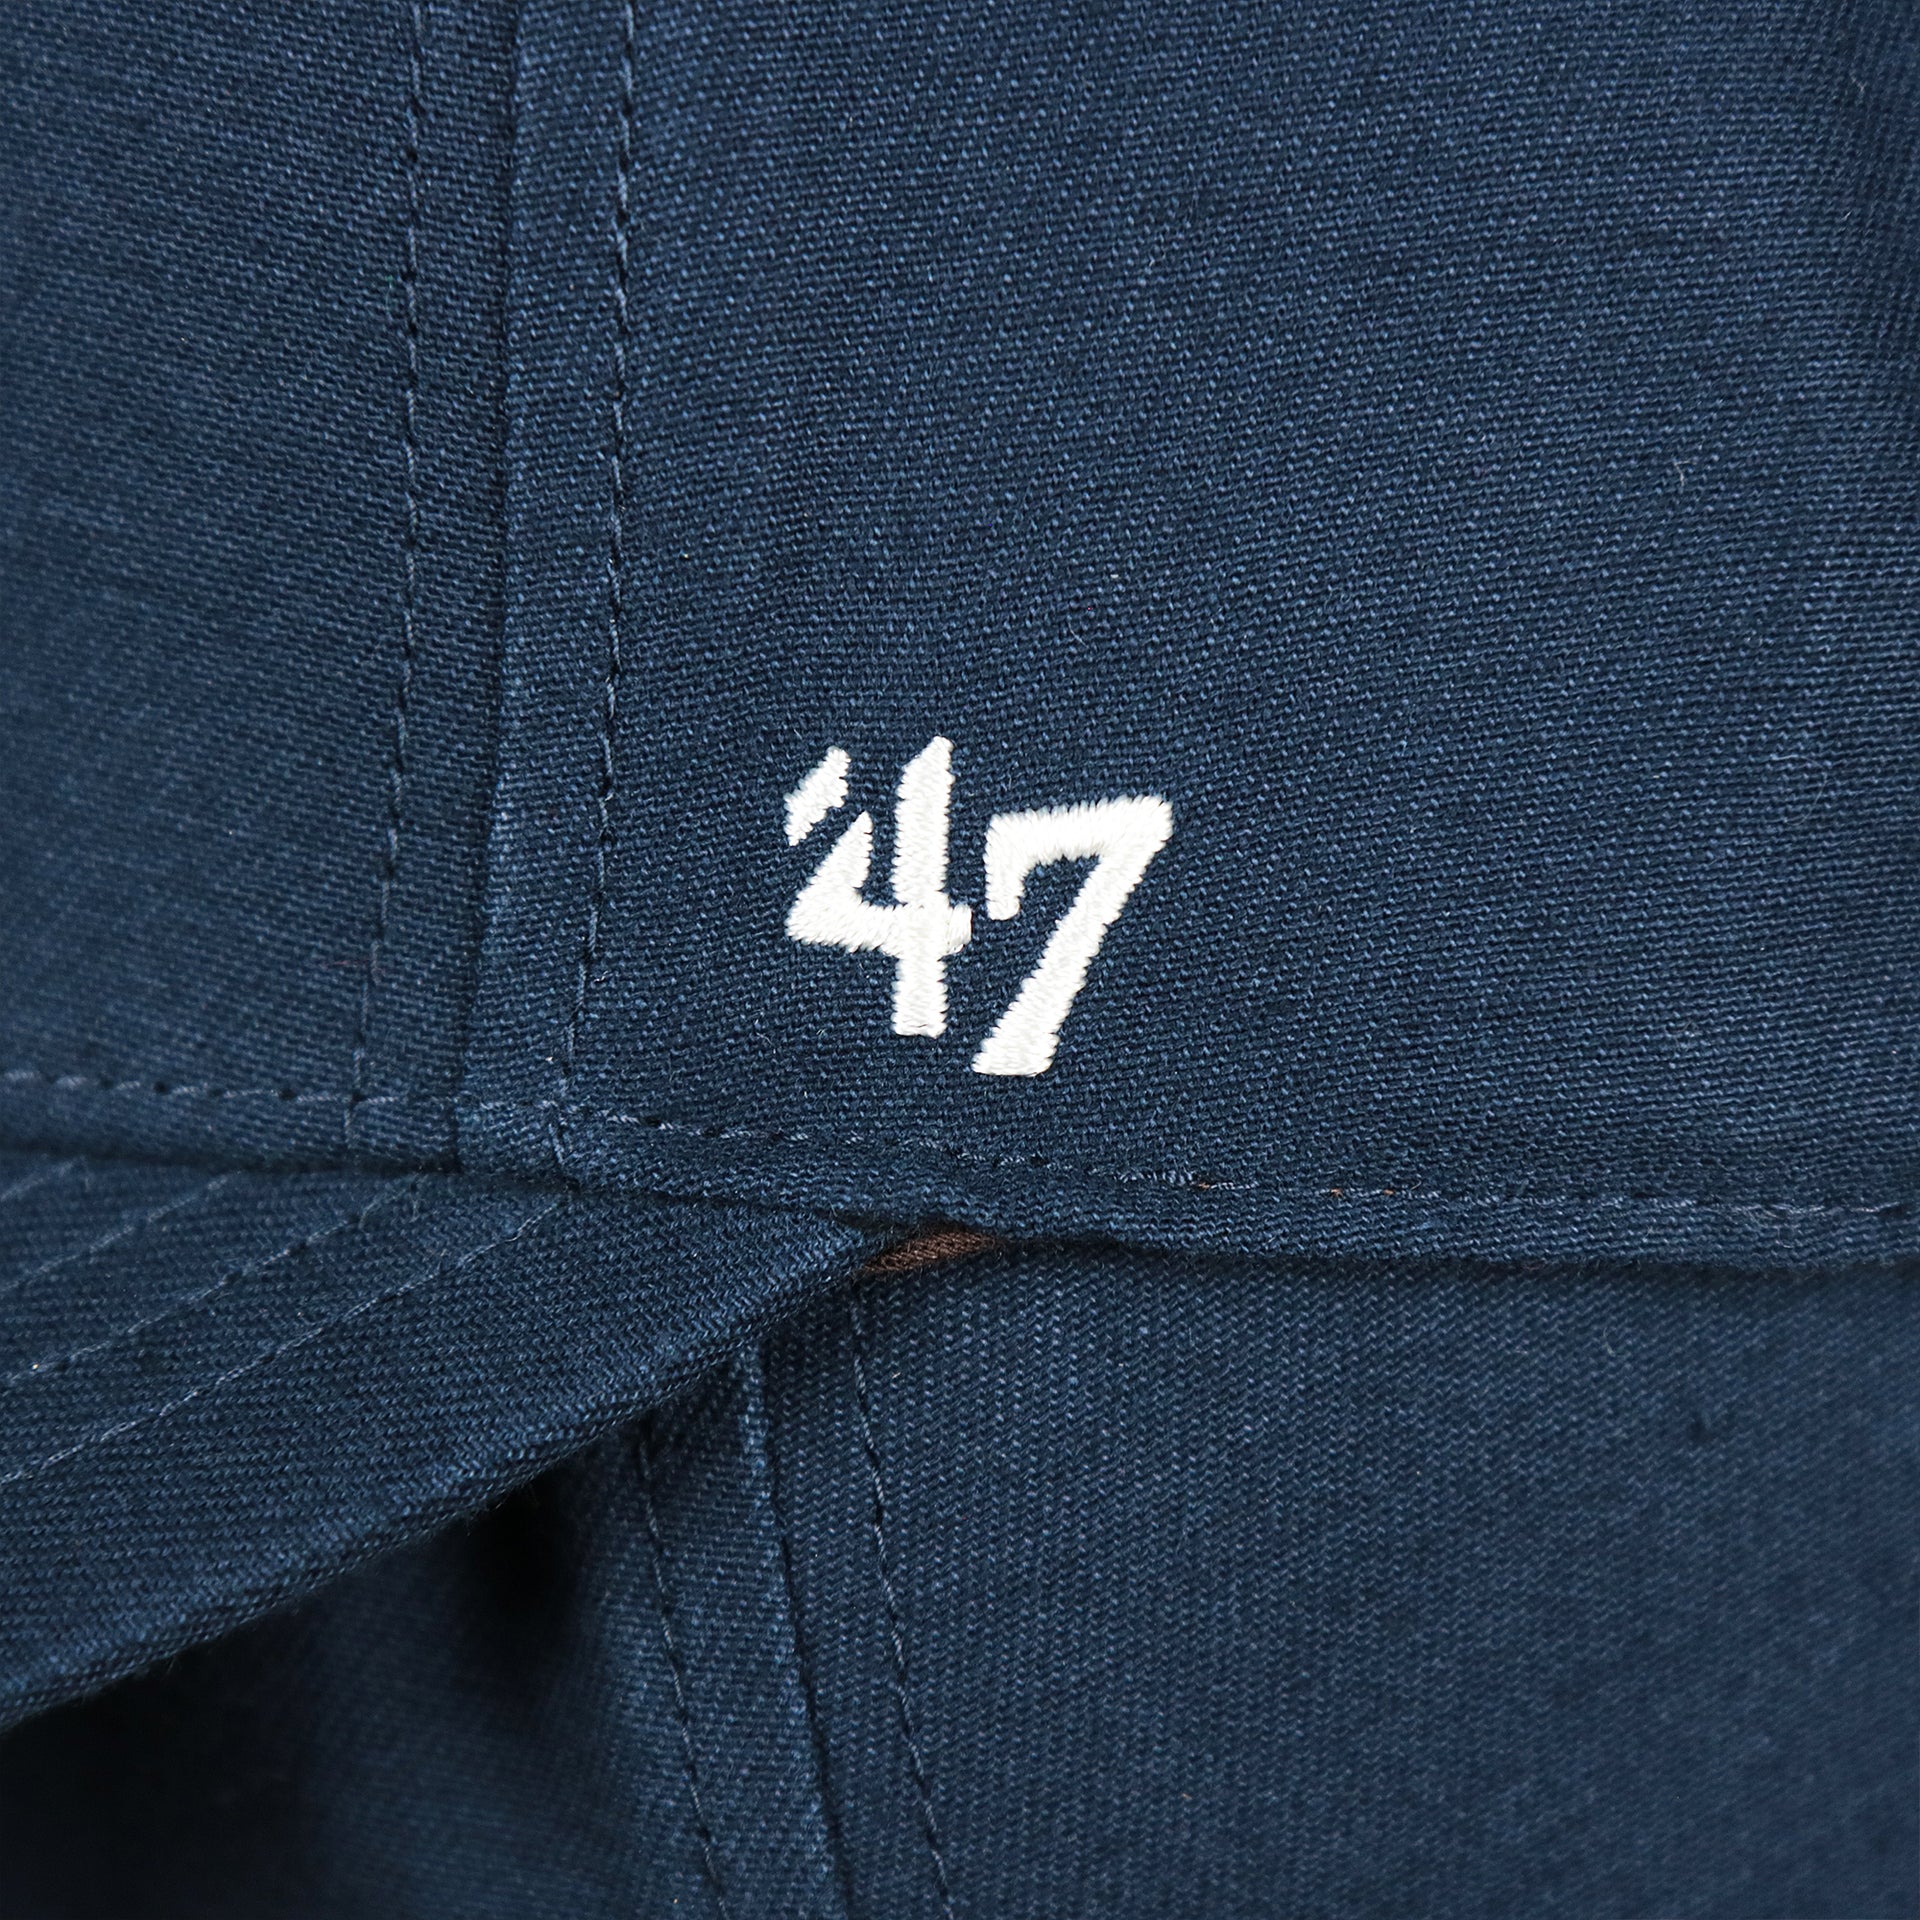 The 47 brand Logo on the Cooperstown Detroit Tigers Felt Tigers Logo Snapback Hat | Navy Blue Snapback Cap